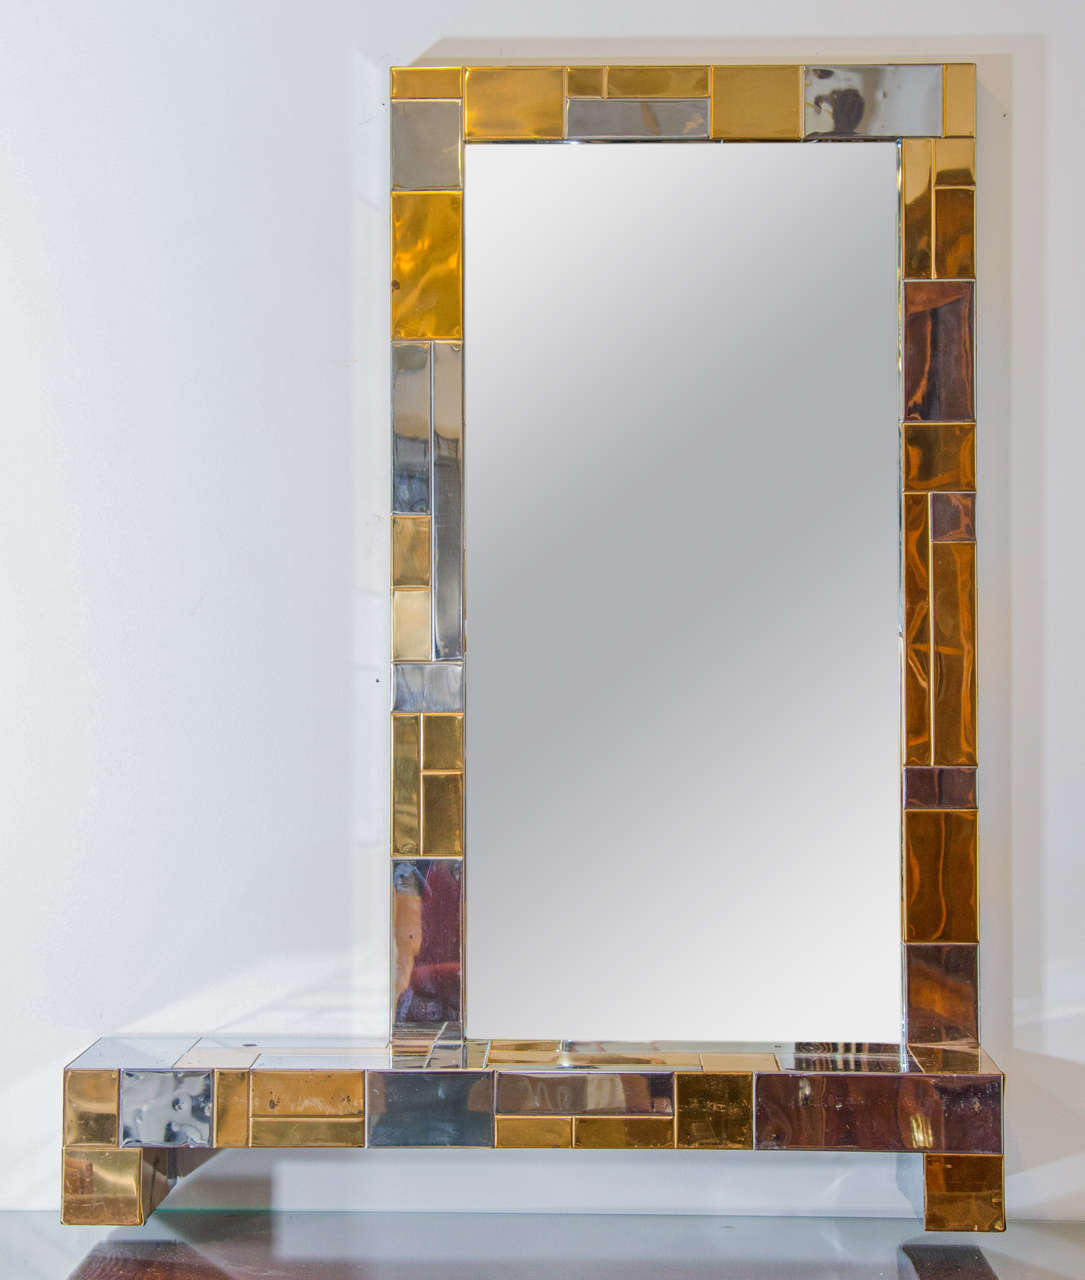 A vintage Paul Evans mirror and shelf in chrome and brass patchwork.

Vintage condition with age appropriate wear.  There has been some oxidation to  the patchwork.

Dimensions: Shelf base: 36